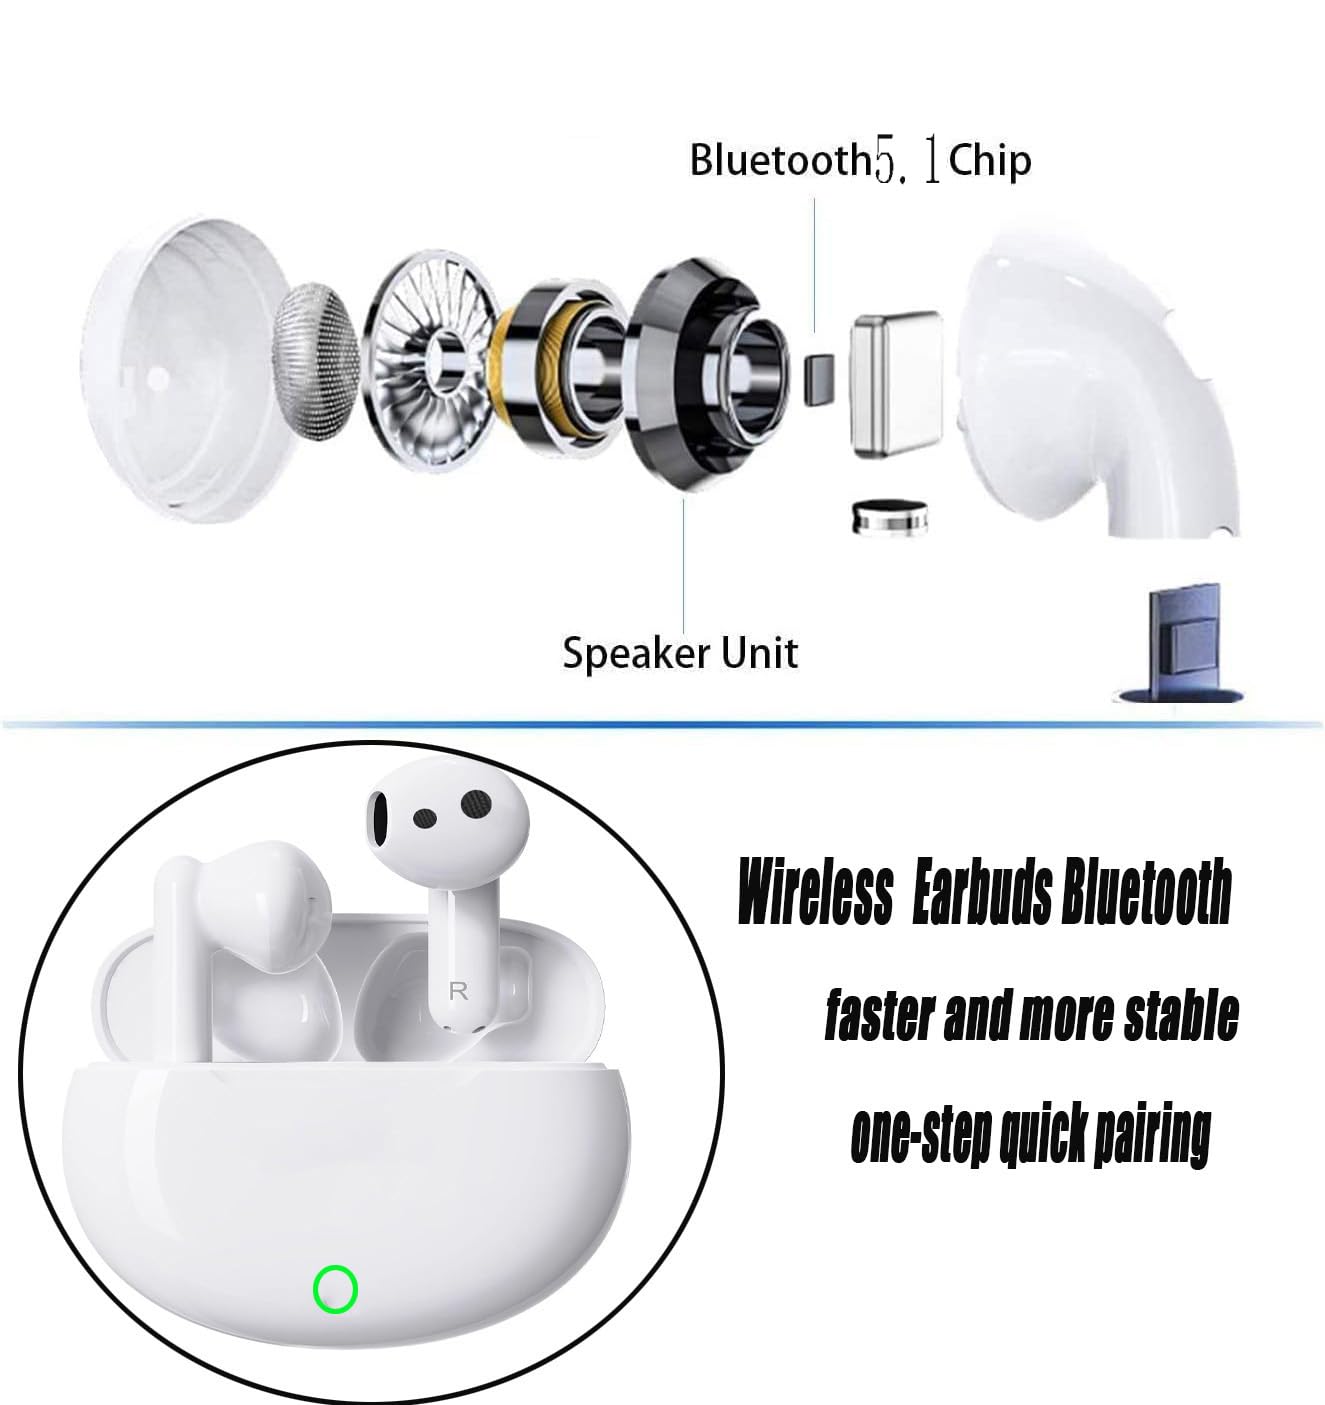 Wireless Headphones,True Wireless Earbuds Bluetooth 5.1,IPX7 Waterproof,with Personalized Noise Cancellation & Sound,24H Playtime with Charging Case, Wireless Earbuds for iPhone/Samsung/Android